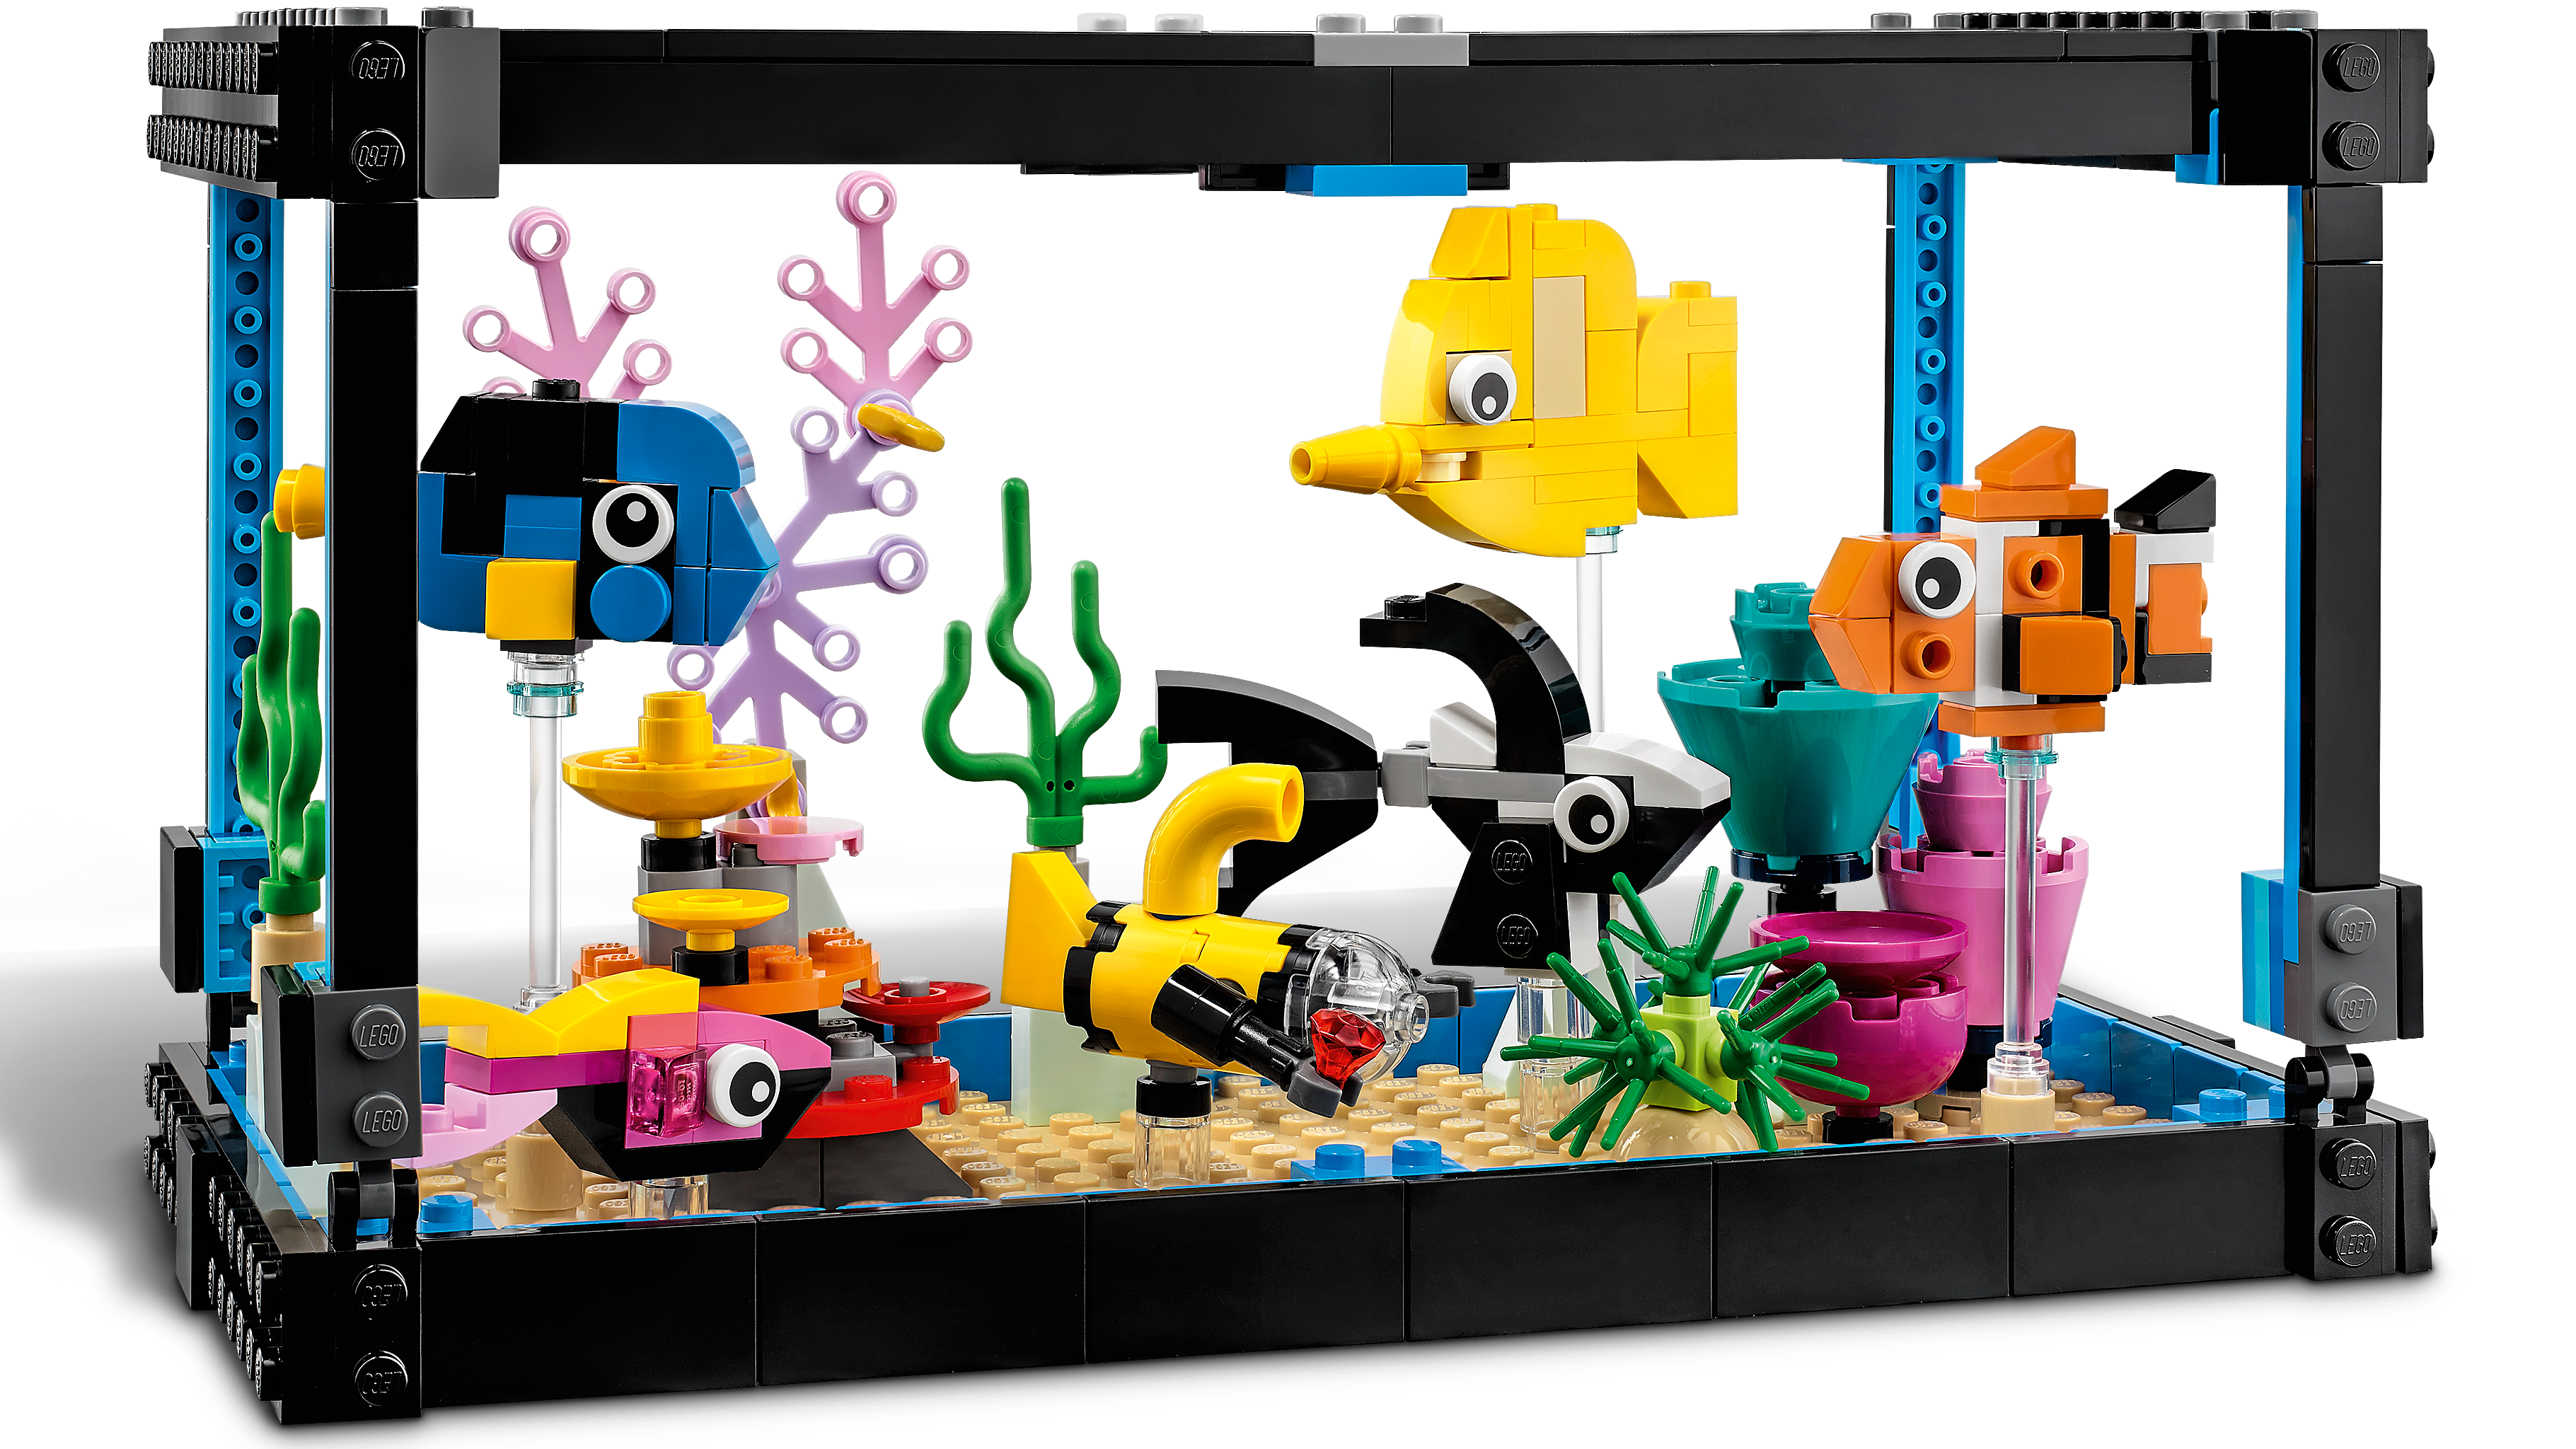 Fish Tank 31122 | Creator 3-in-1 | Buy online at the Official LEGO® Shop